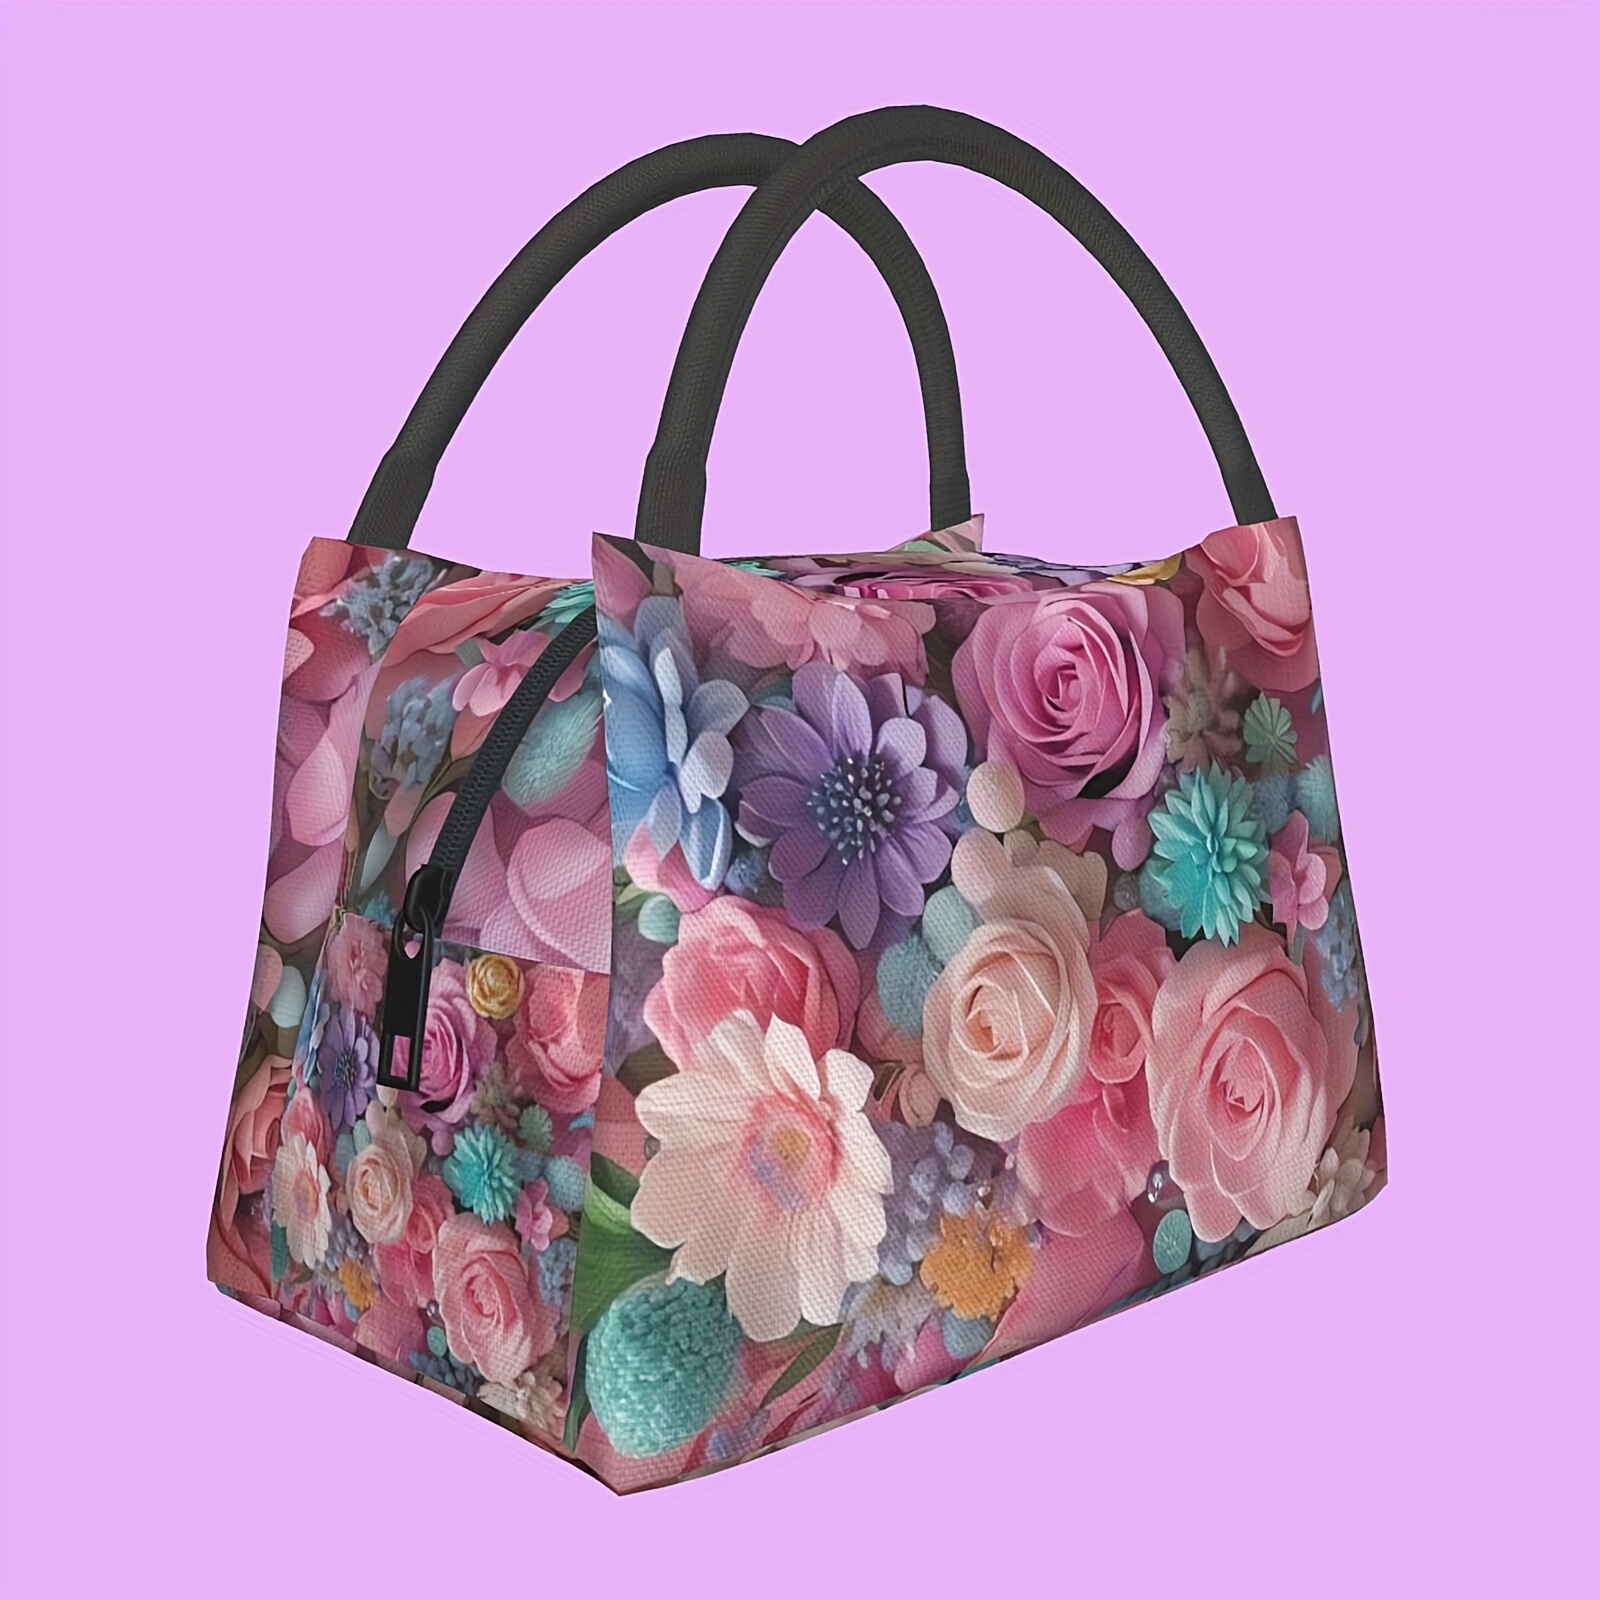 

1pc Flower Pattern Portable Insulated Lunch Bag, Reusable Leakproof Insulated Cooler Bag, For Work Picnic Beach Camping